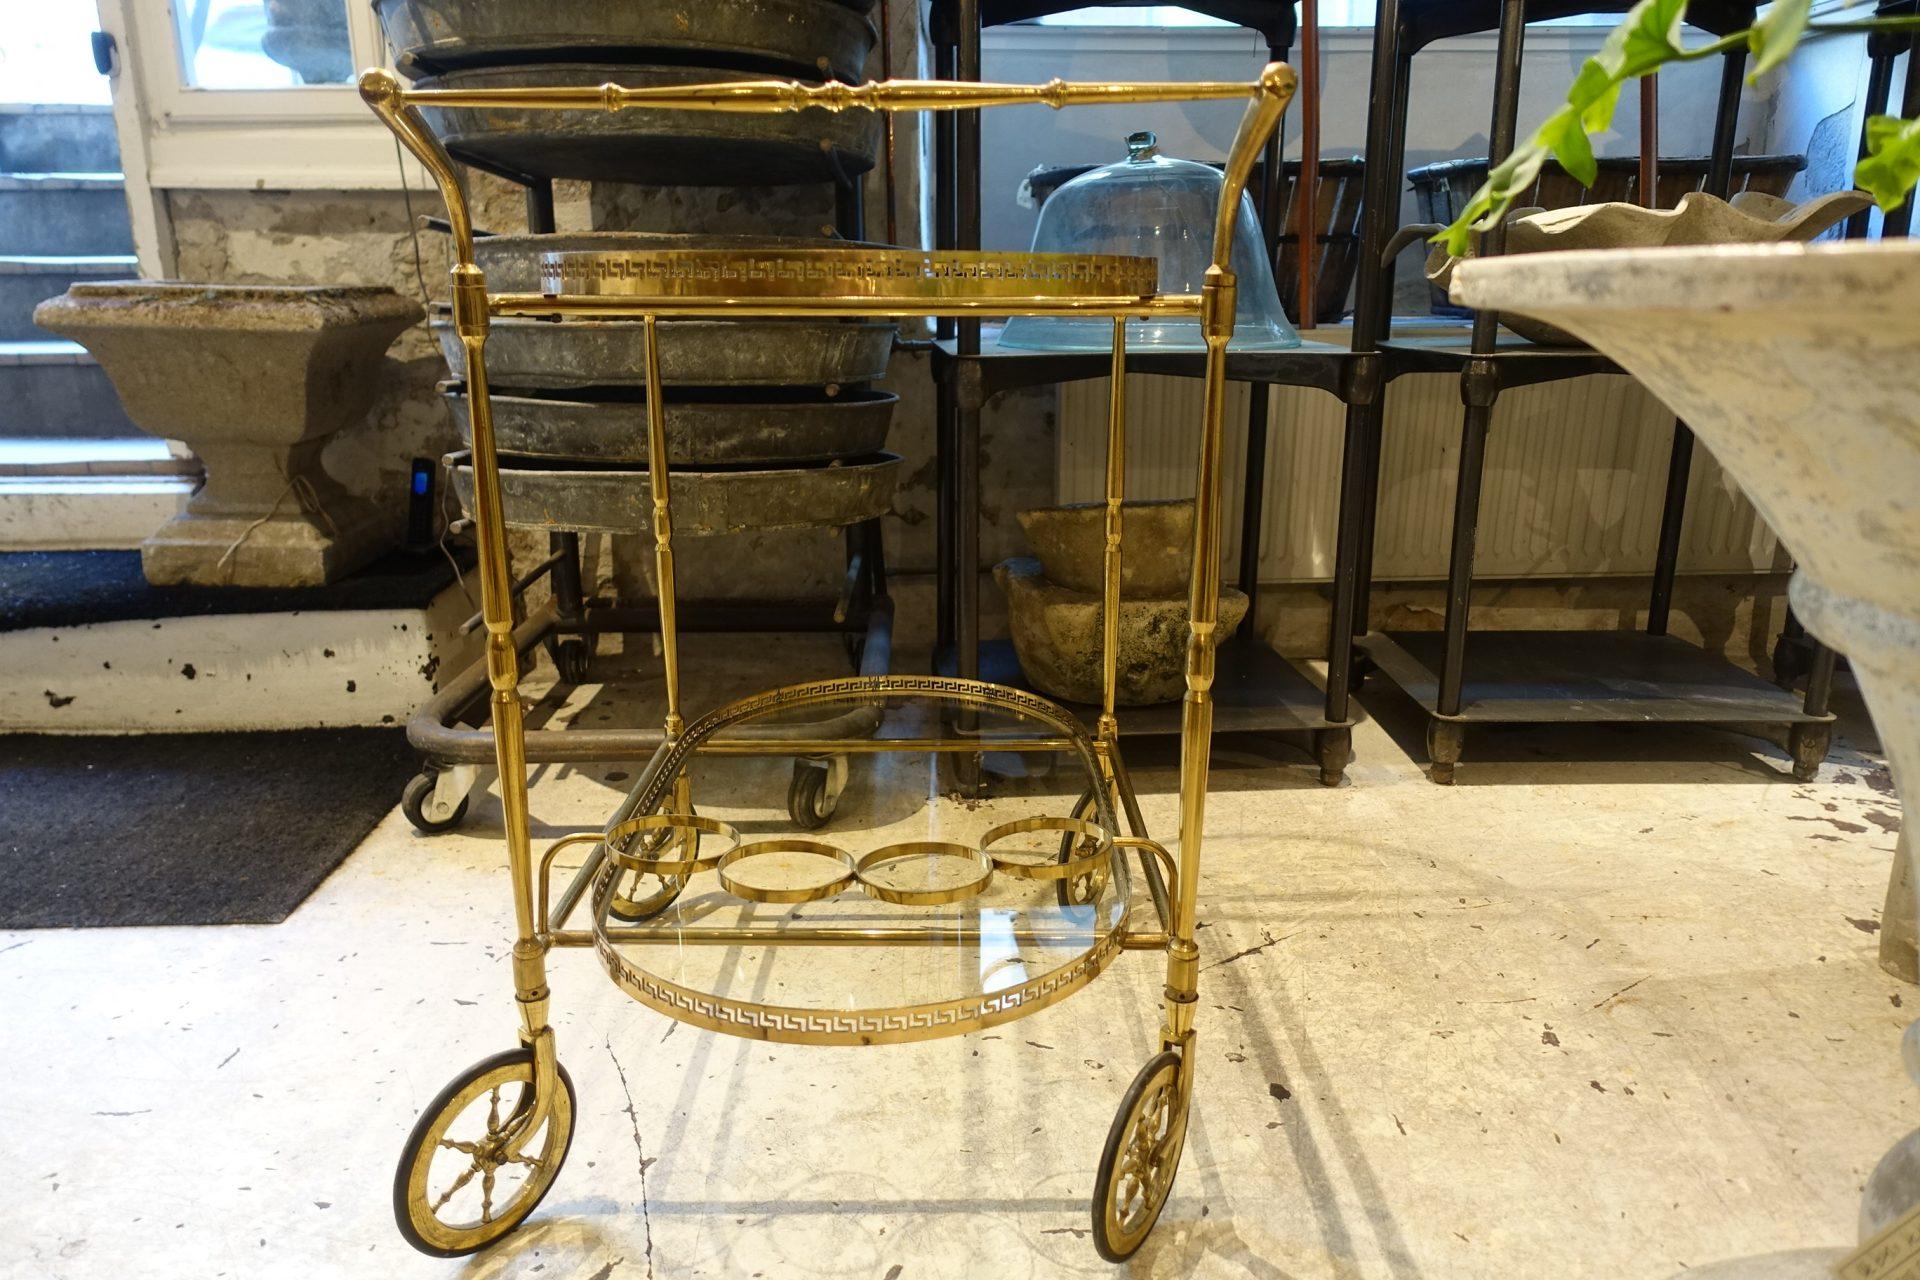 Charming French bar cart or serving trolley on wheels and with two glass shelves. Elegantly made with sophisticated brass frame. Suitable as a bar / trolley or as a lamp and side table by a chair or sofa. A lovely midcentury piece.